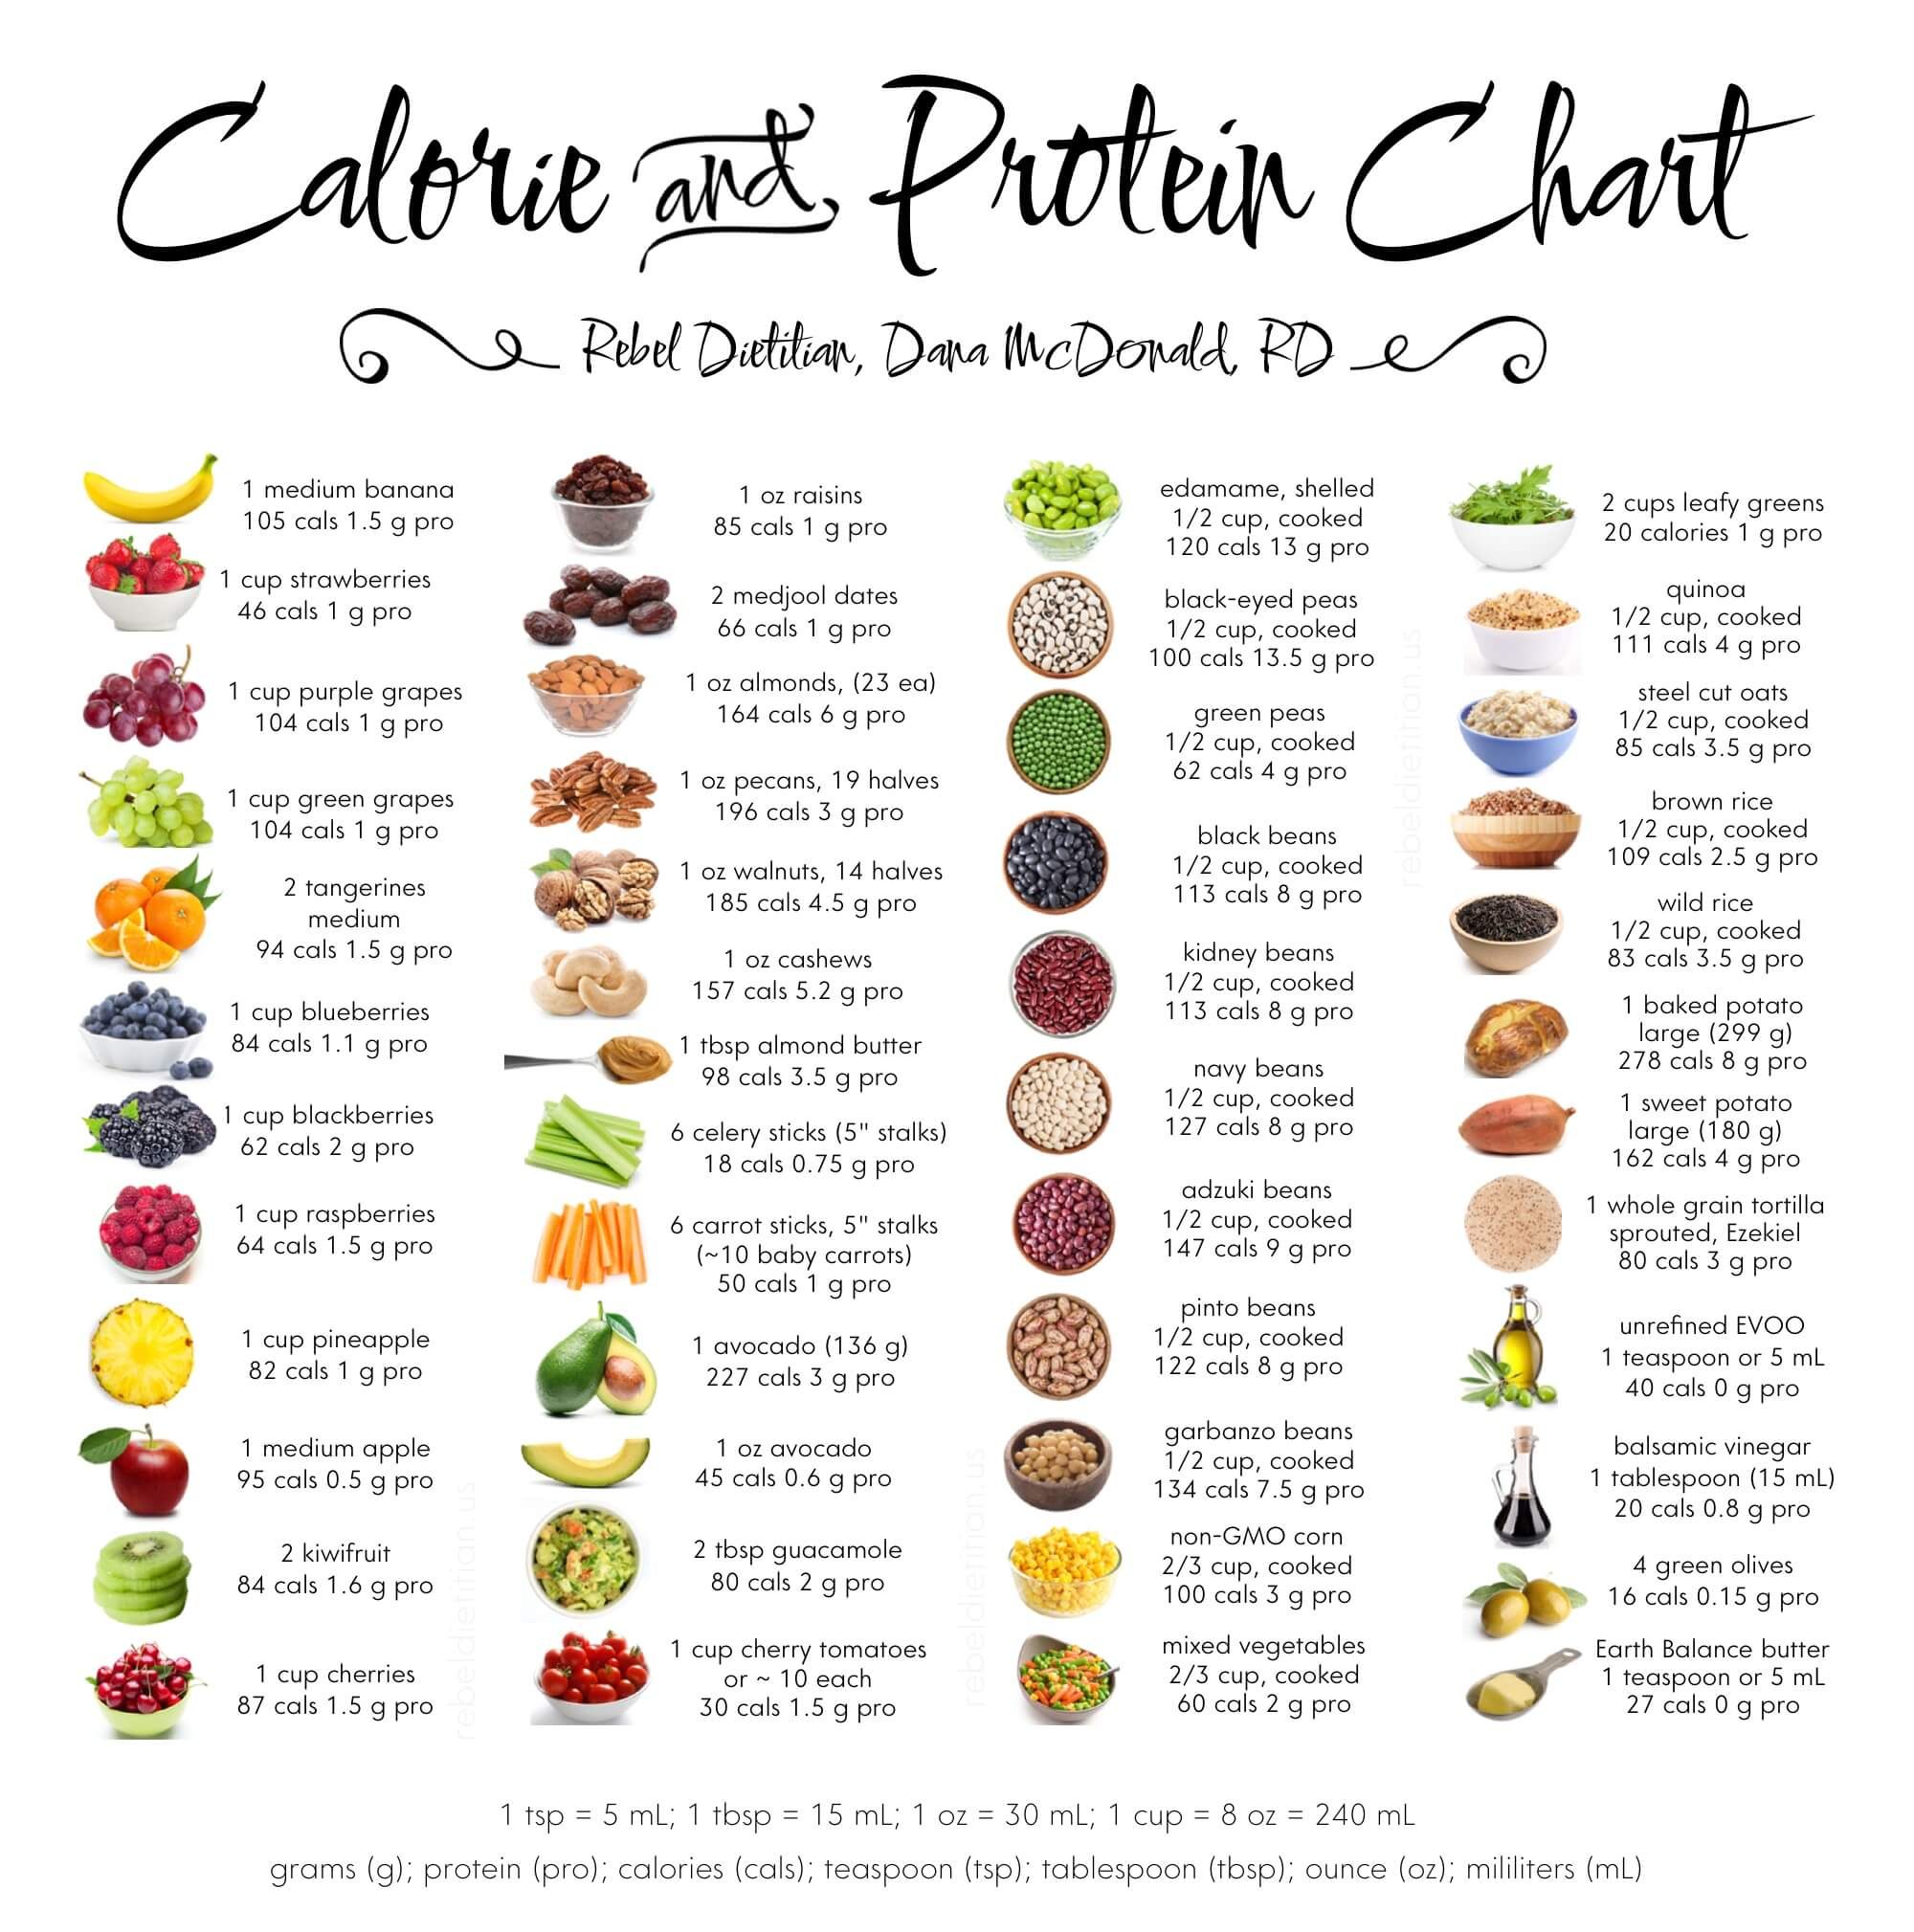 Calories in some Plant Foods